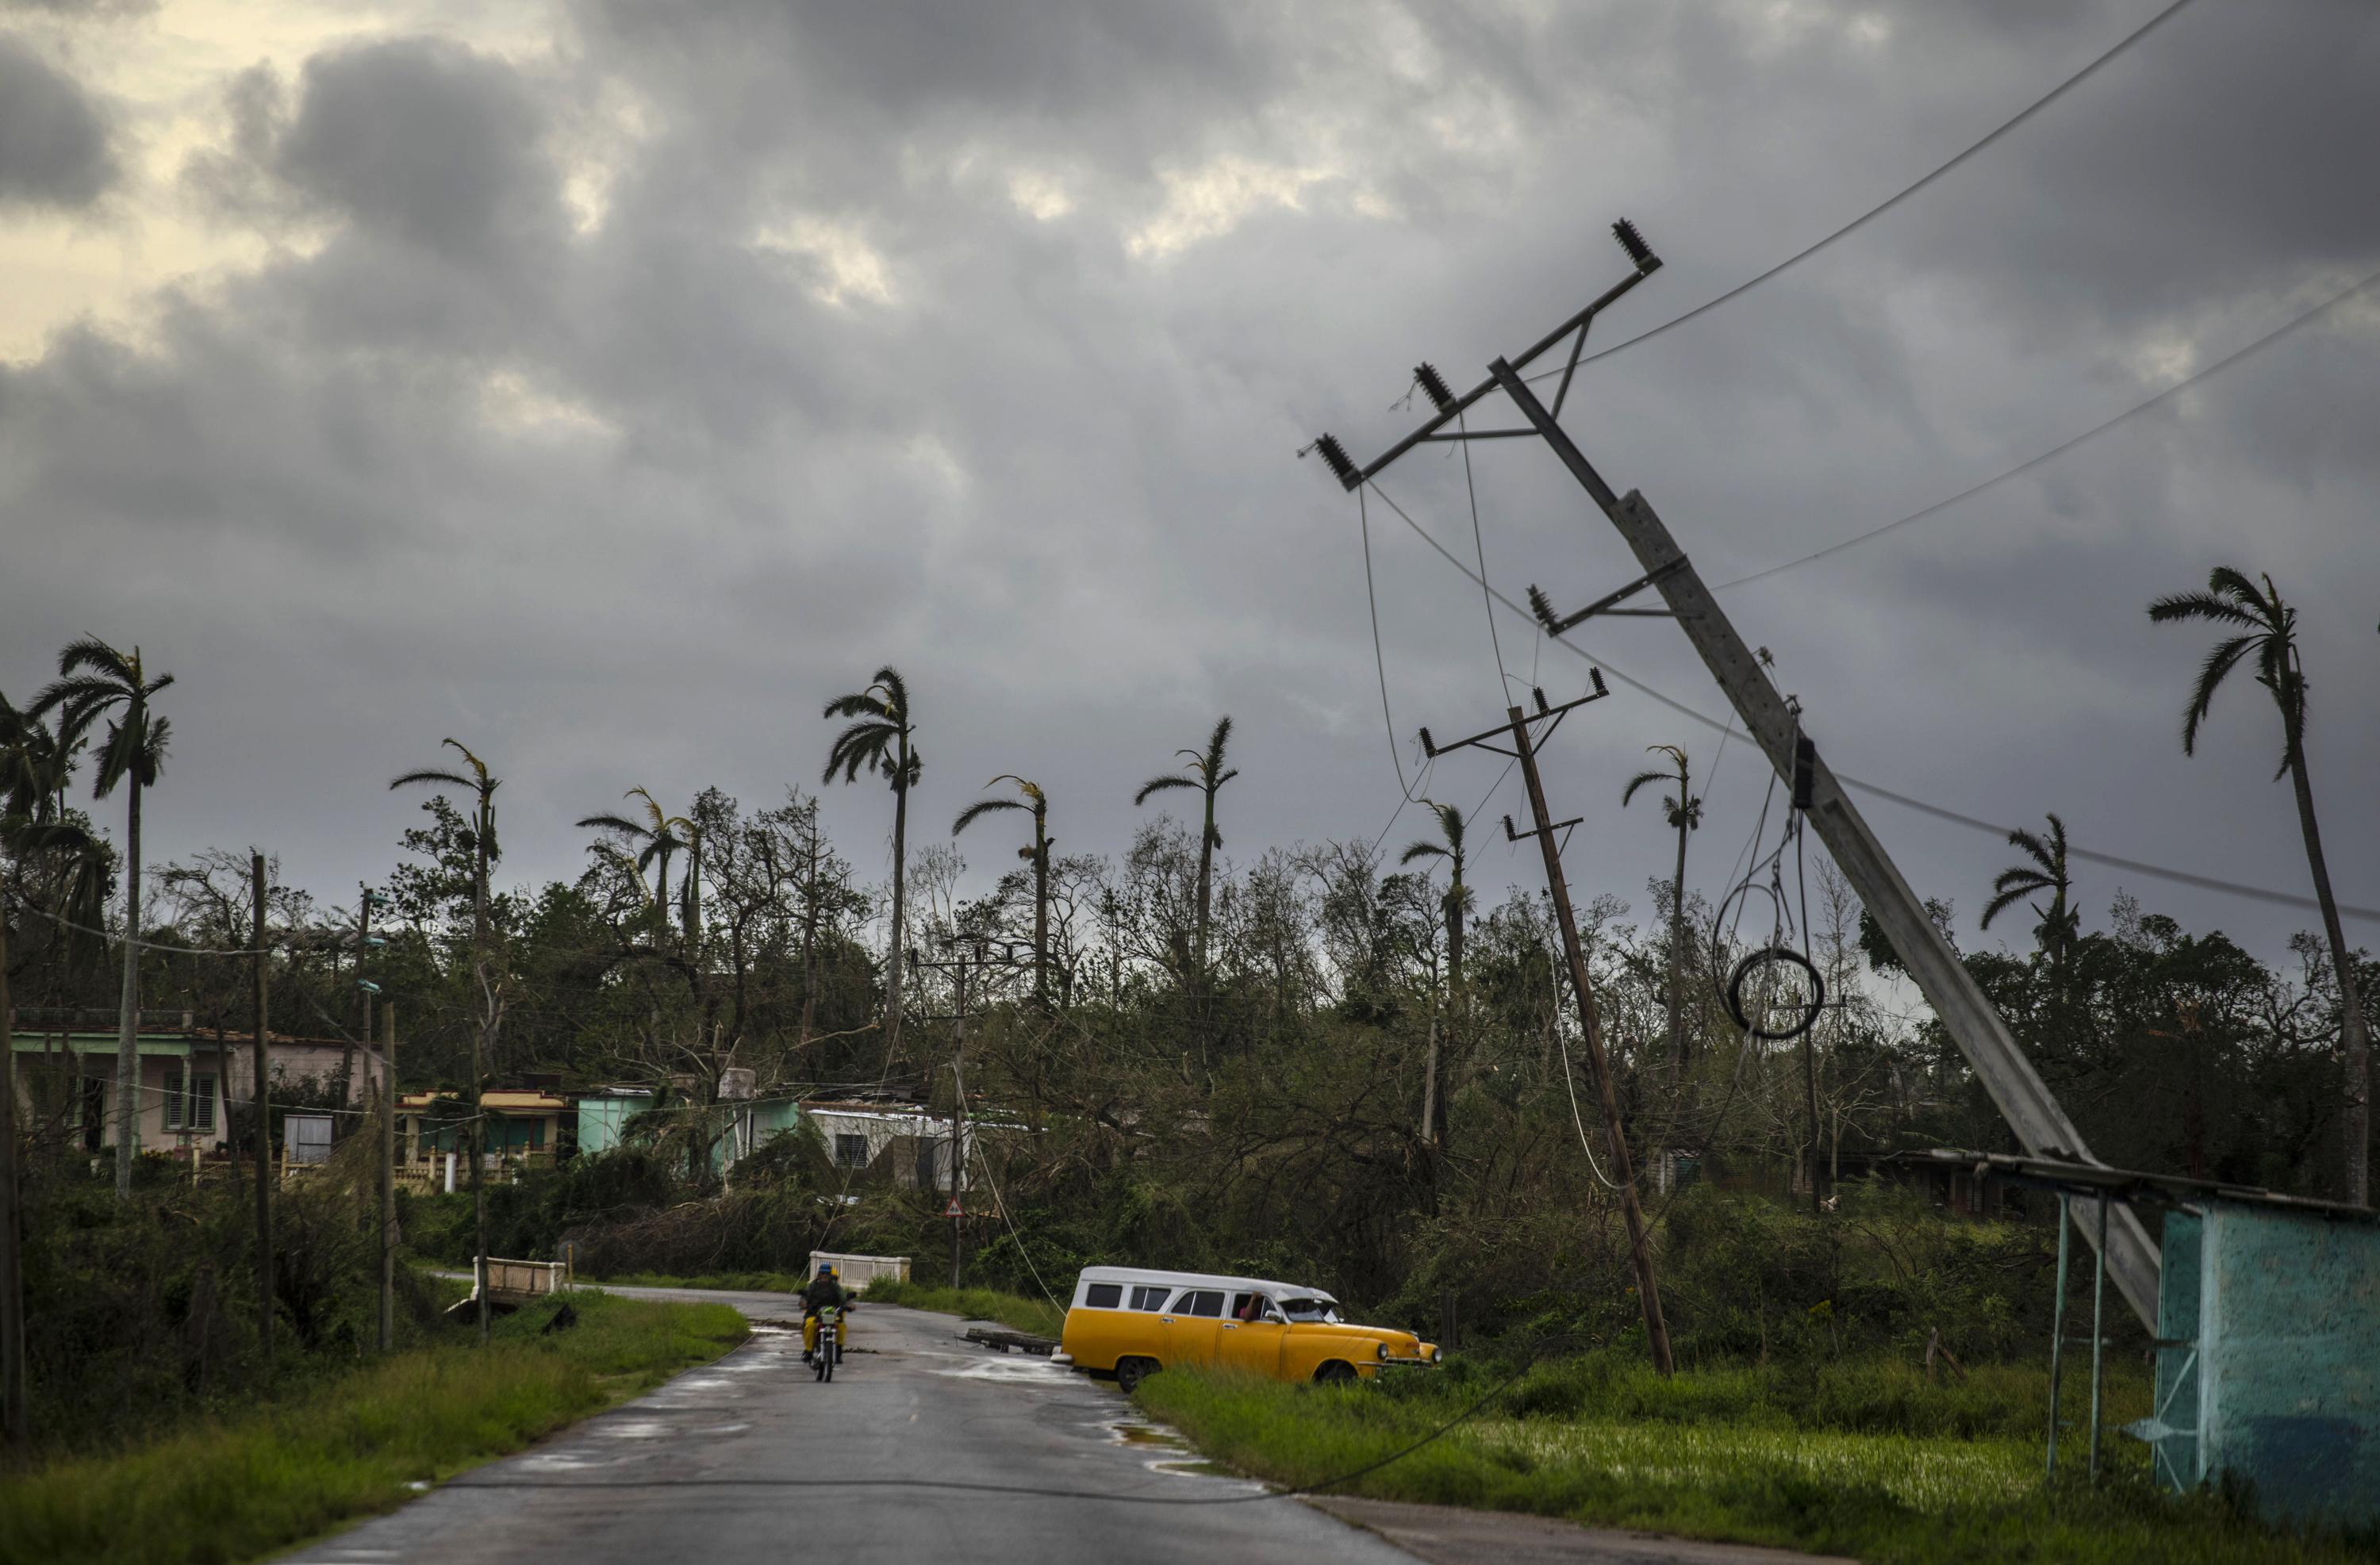 Cuba without electricity after hurricane hammers power grid - The Associated Press